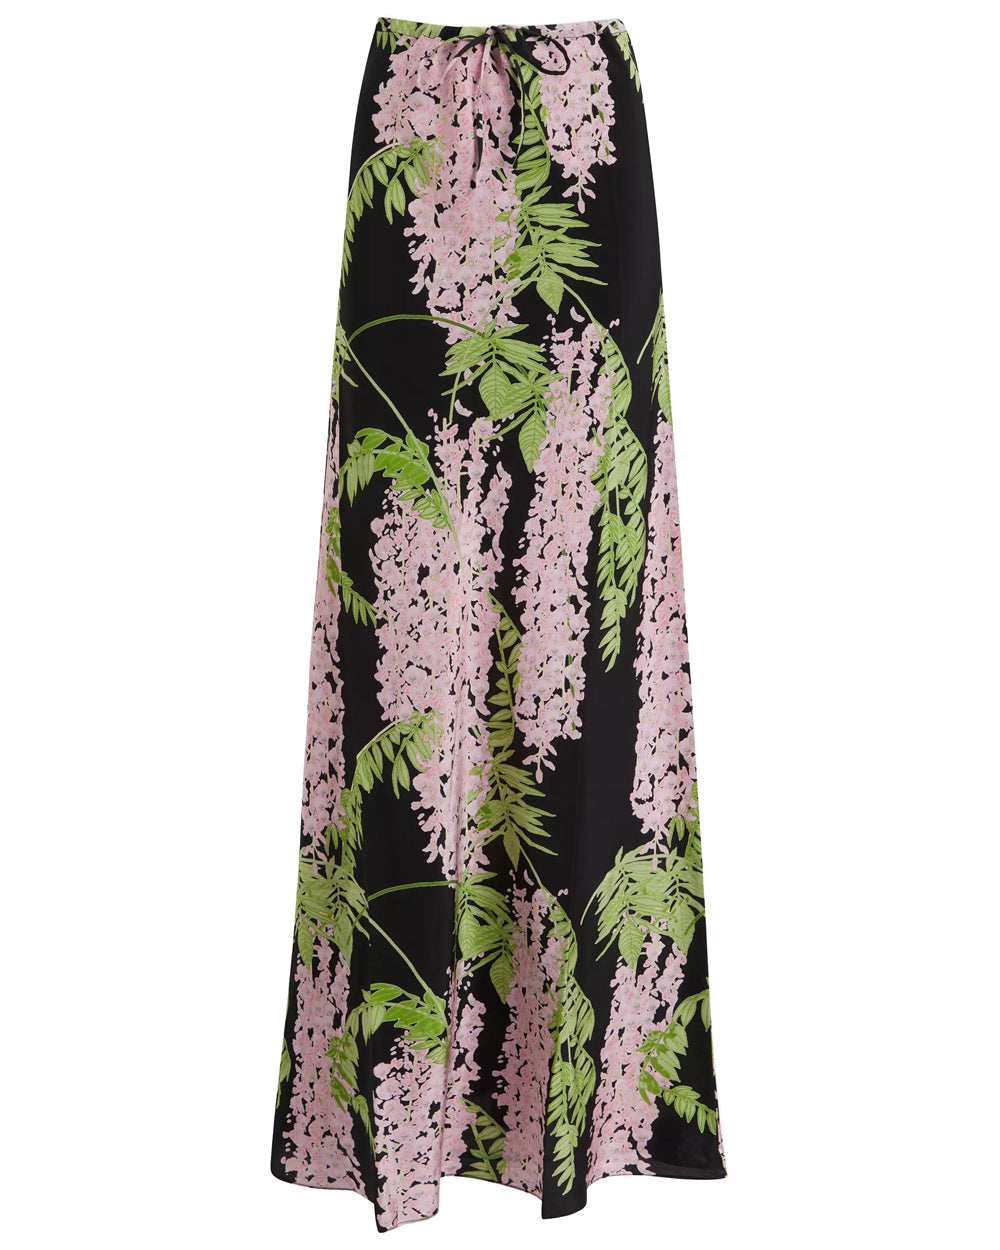 Black and Pink Wisteria Print Emily Maxi Skirt